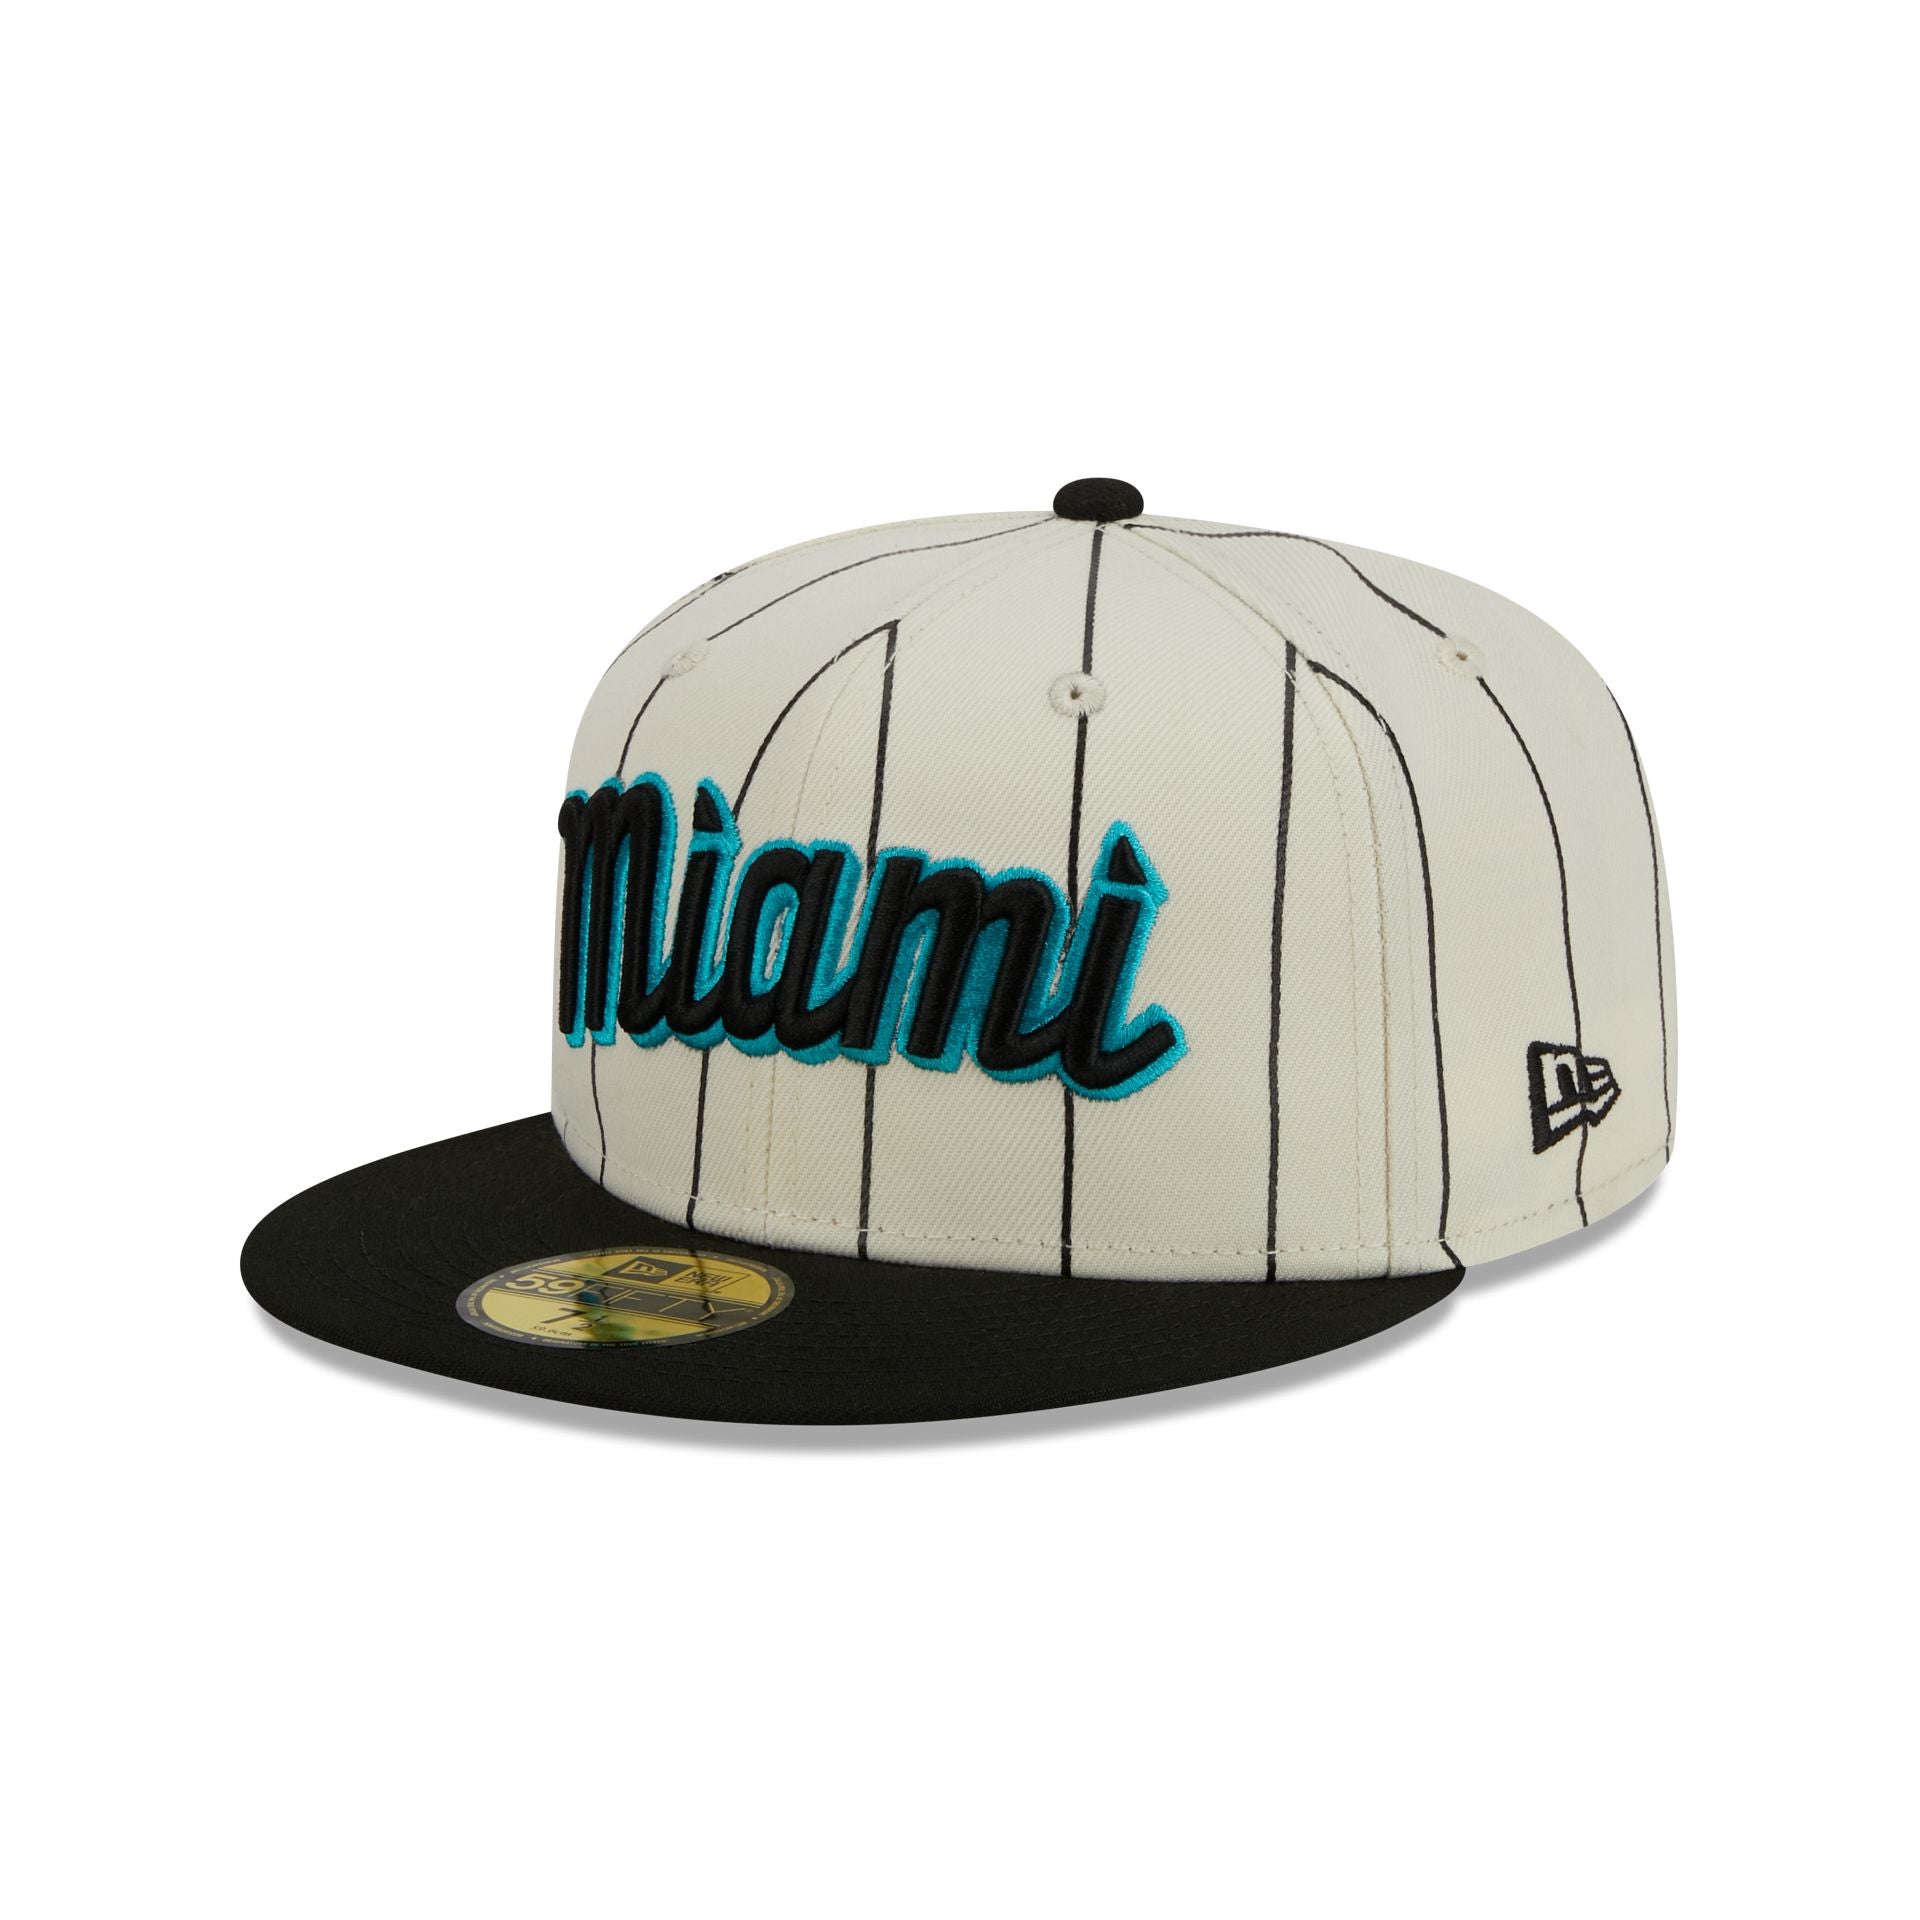 Miami Marlins New Era City Connect 59FIFTY Fitted Hat -Turquoise